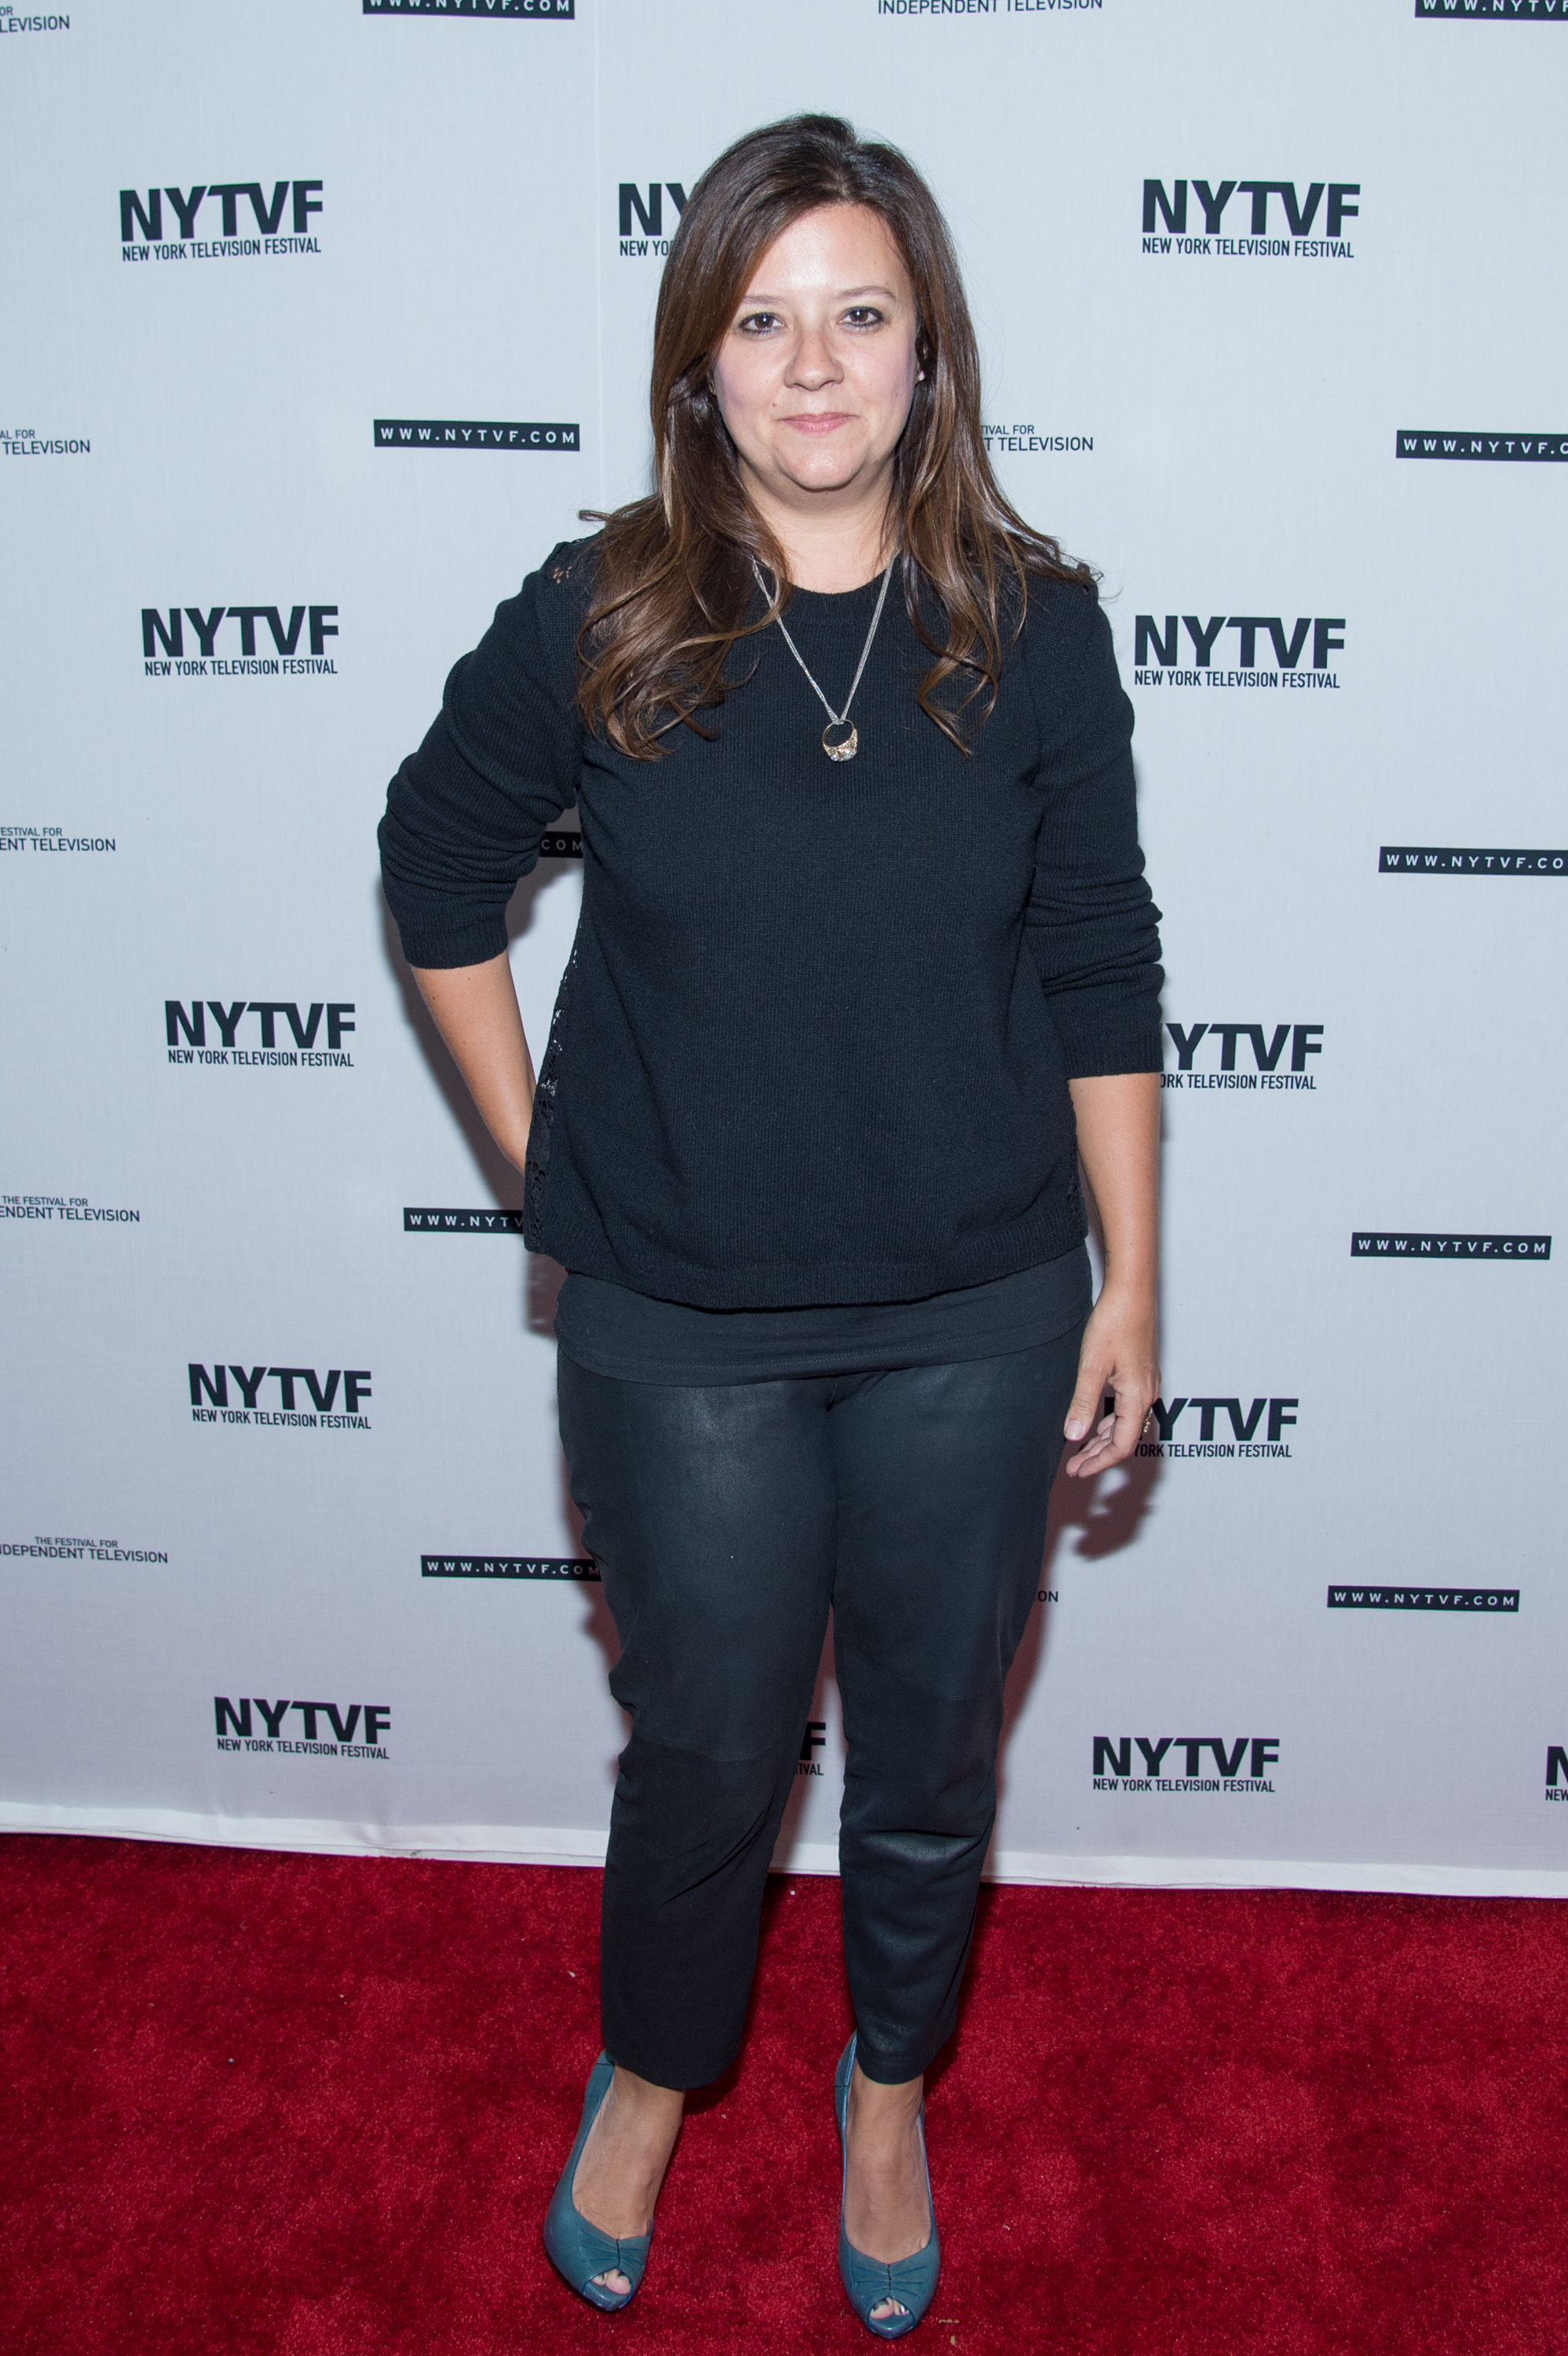 Producer Stephanie Laing  on Oct. 23, 2014 in New York City.